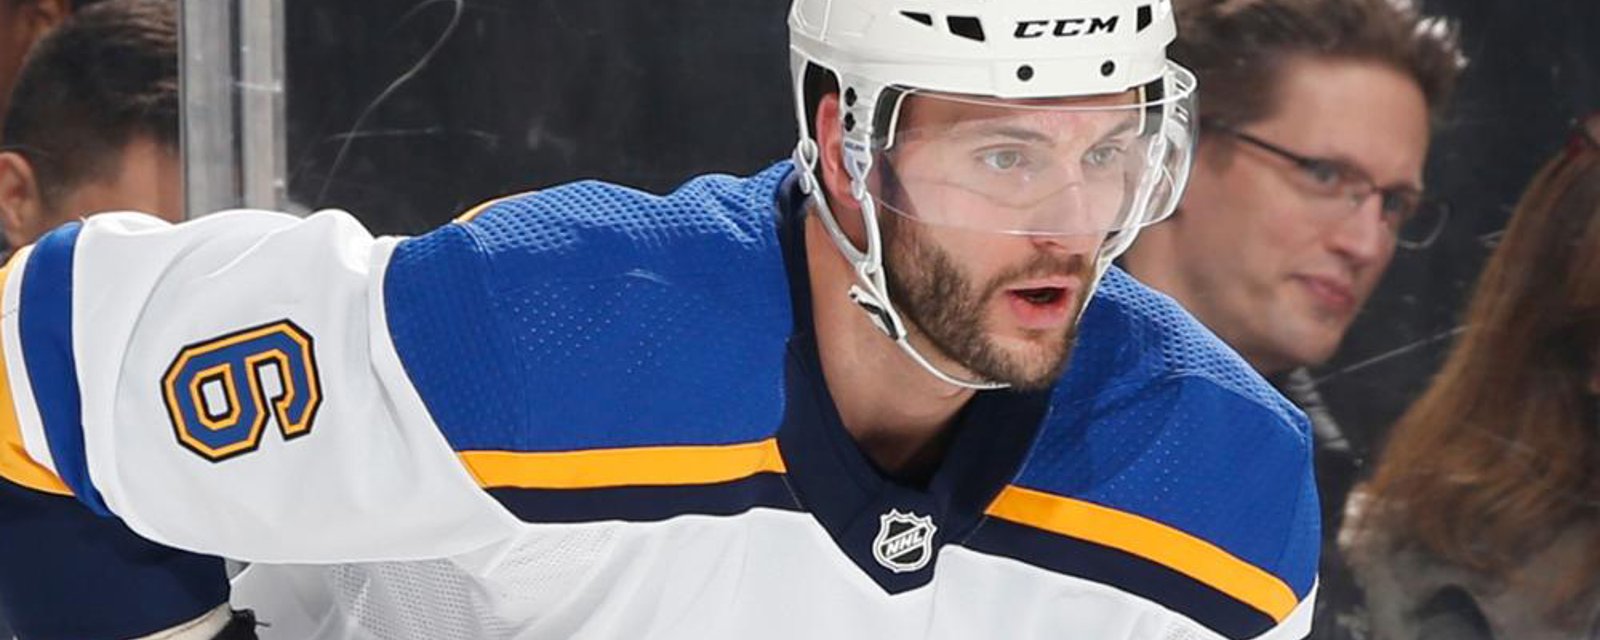 Marco Scandella signs a $13 million contract